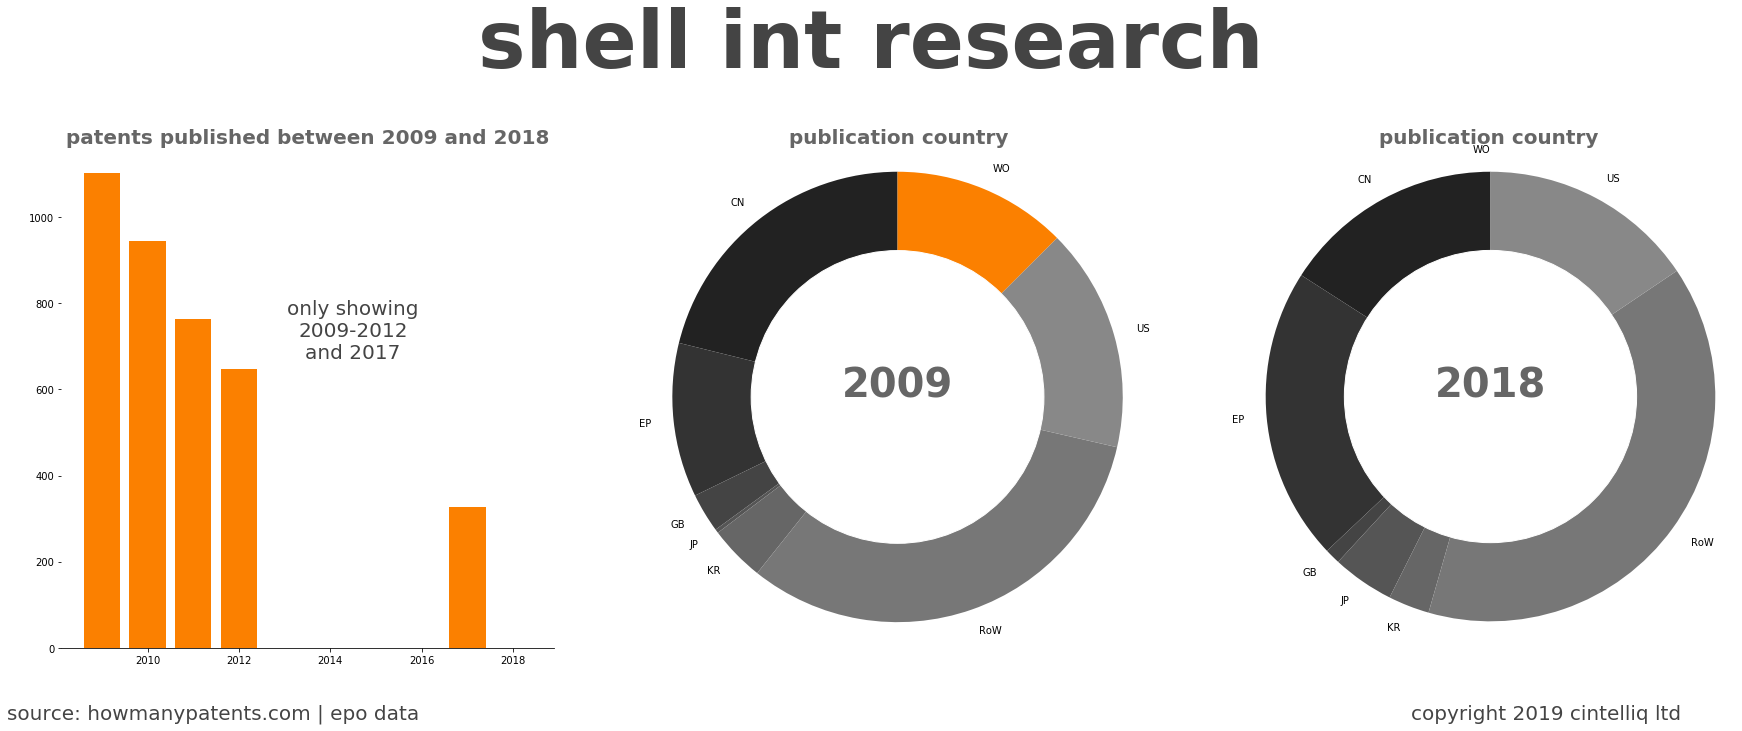 summary of patents for Shell Int Research